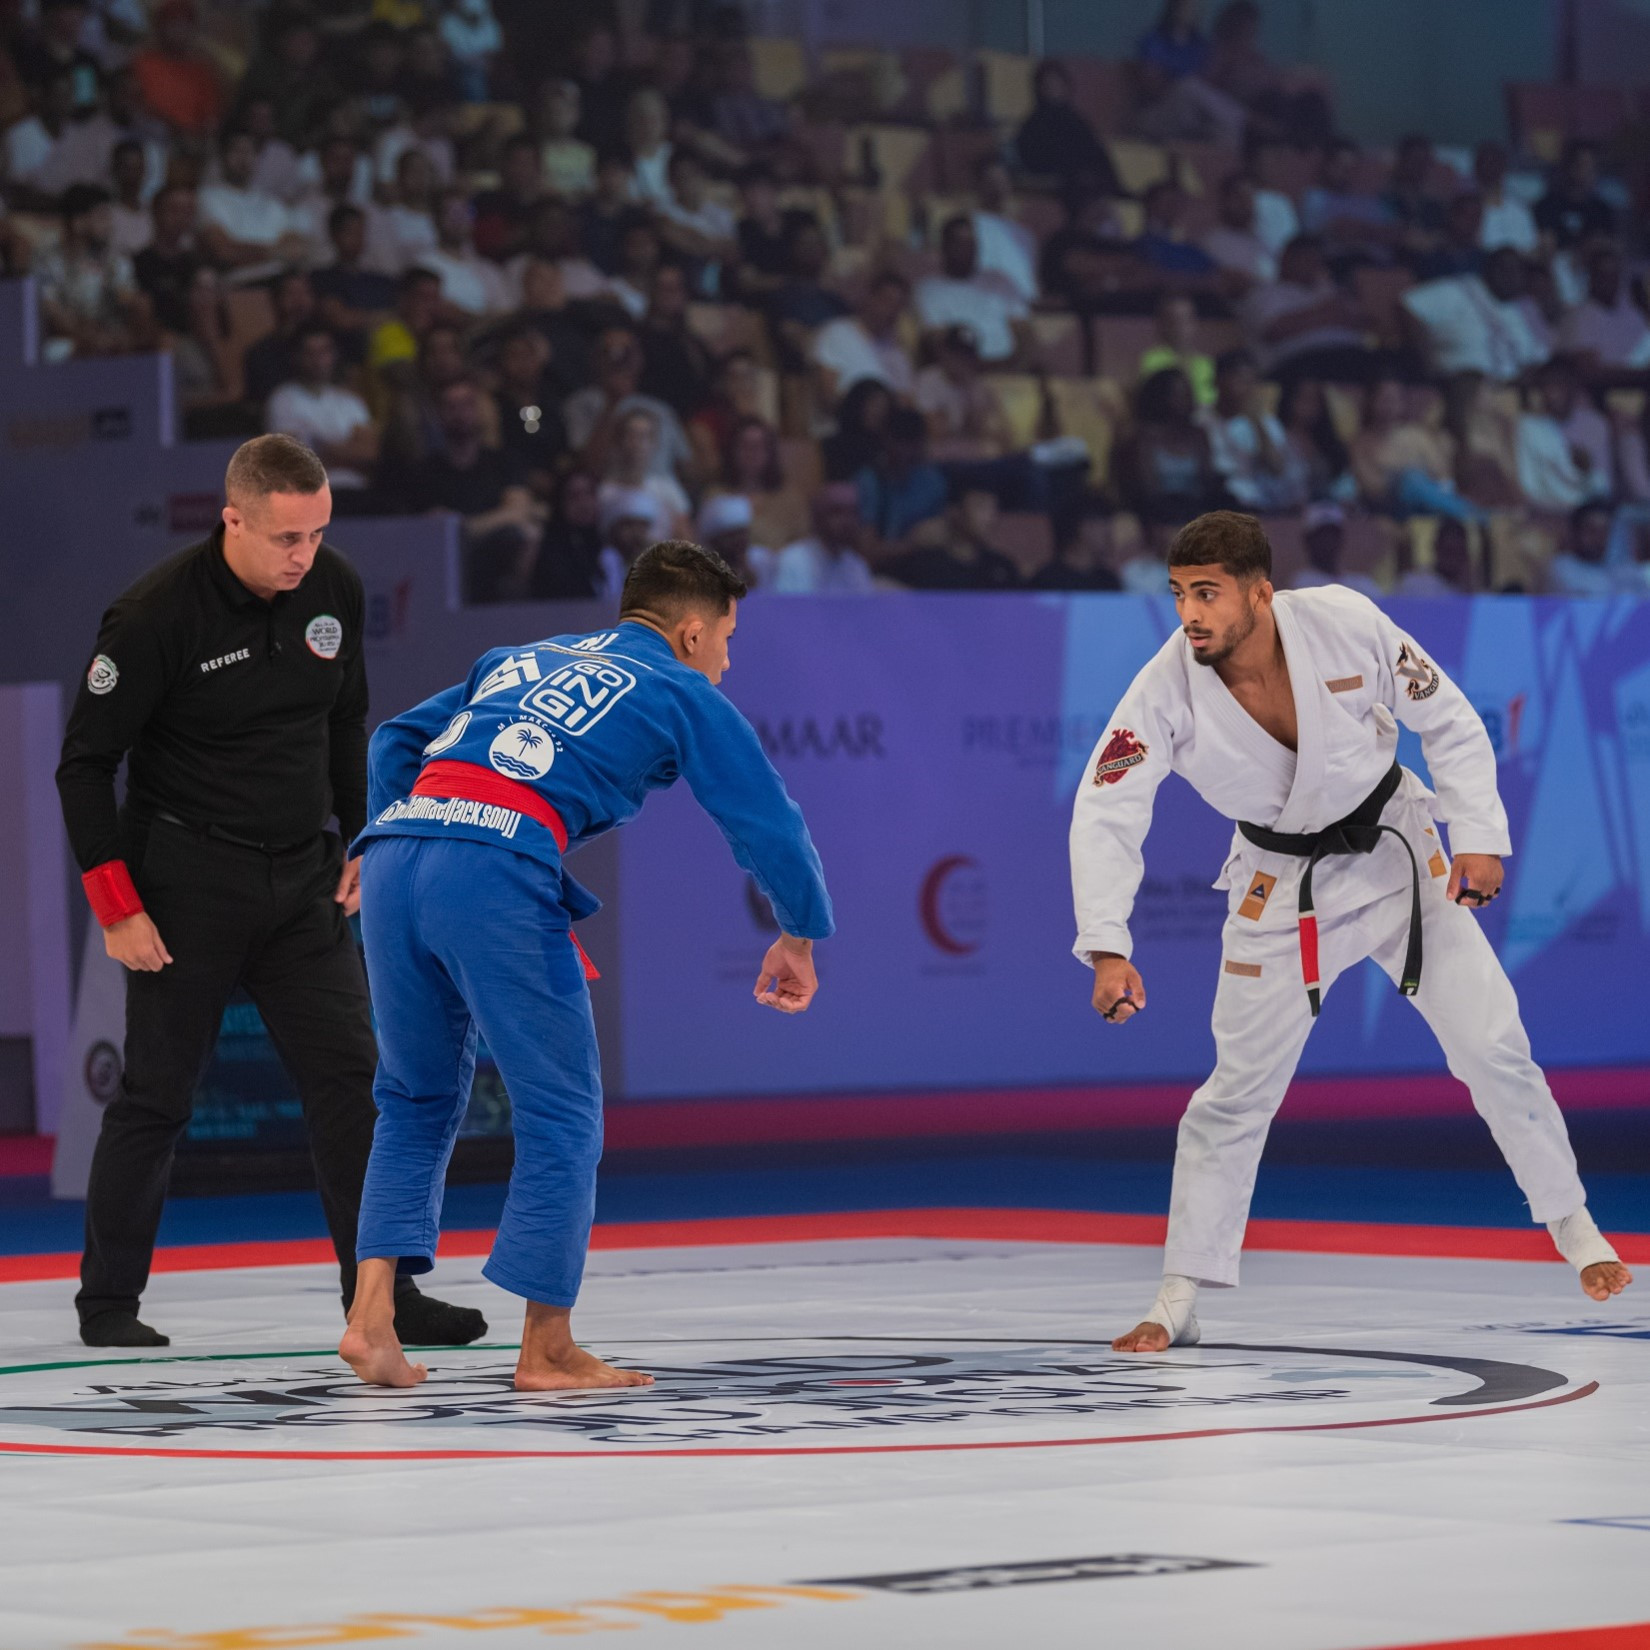  Zayed Al Kathiri, right, is in action for the host nation in the final leg of the Abu Dhabi Grand Slam Ju-Jitsu World Tour ©Action UAE